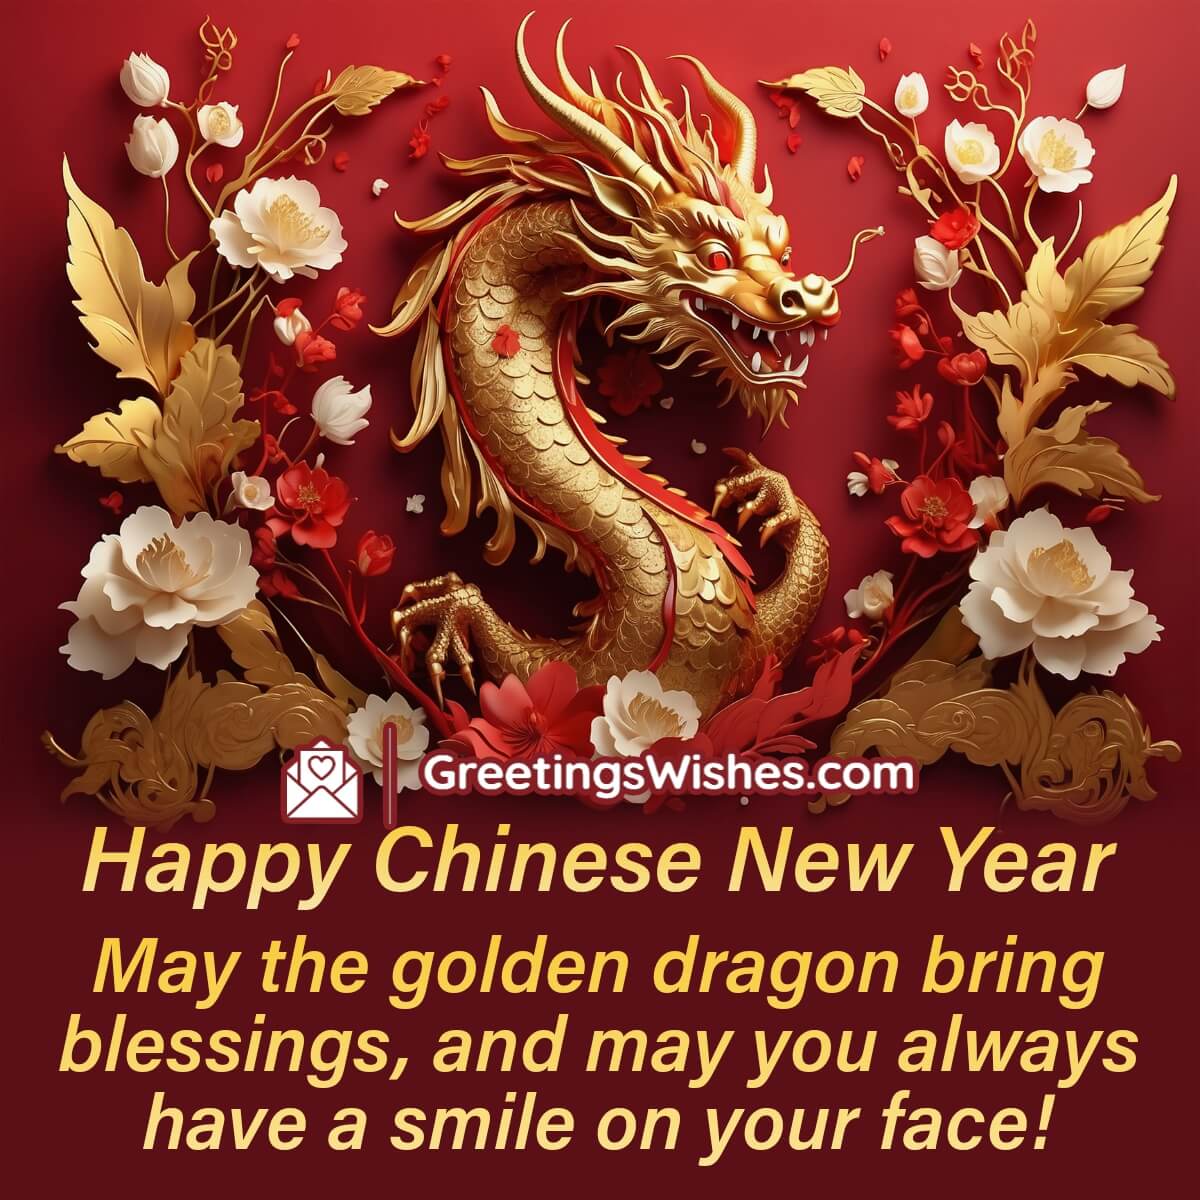 Chinese New Year Greetings (10th February)